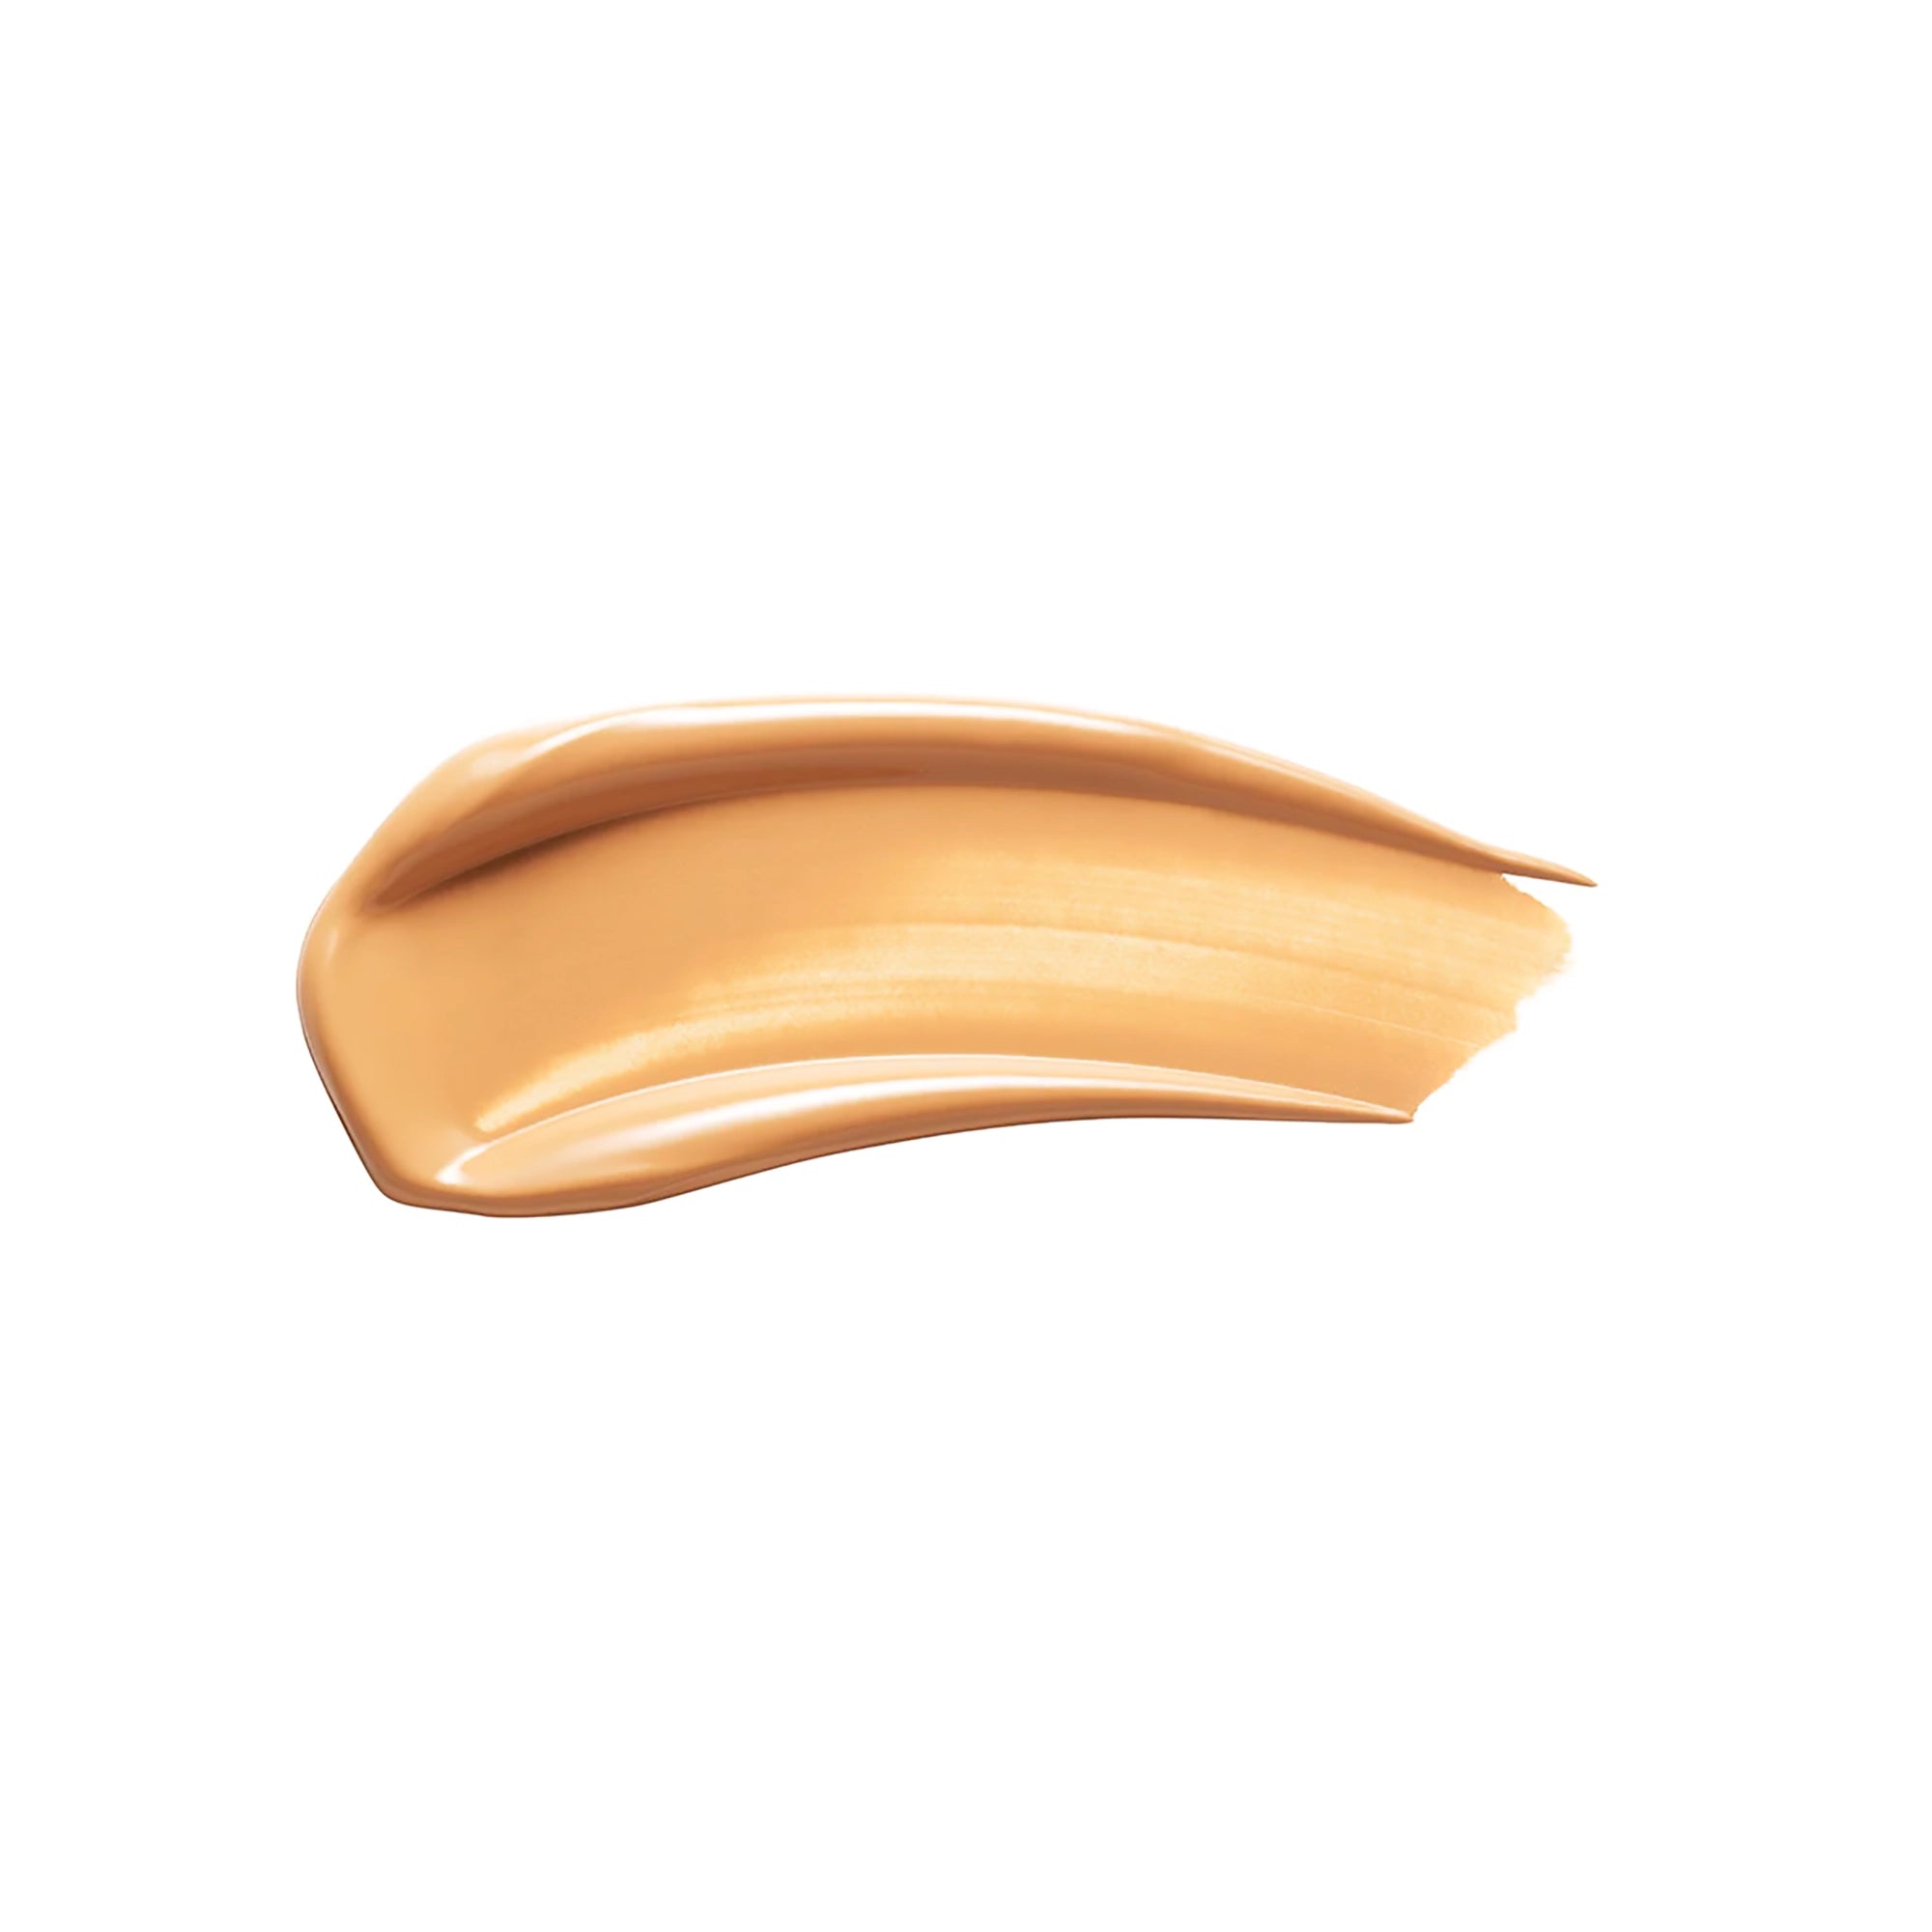 Kevyn Aucoin The Etherealist Super Natural Concealer / LIGHT 1